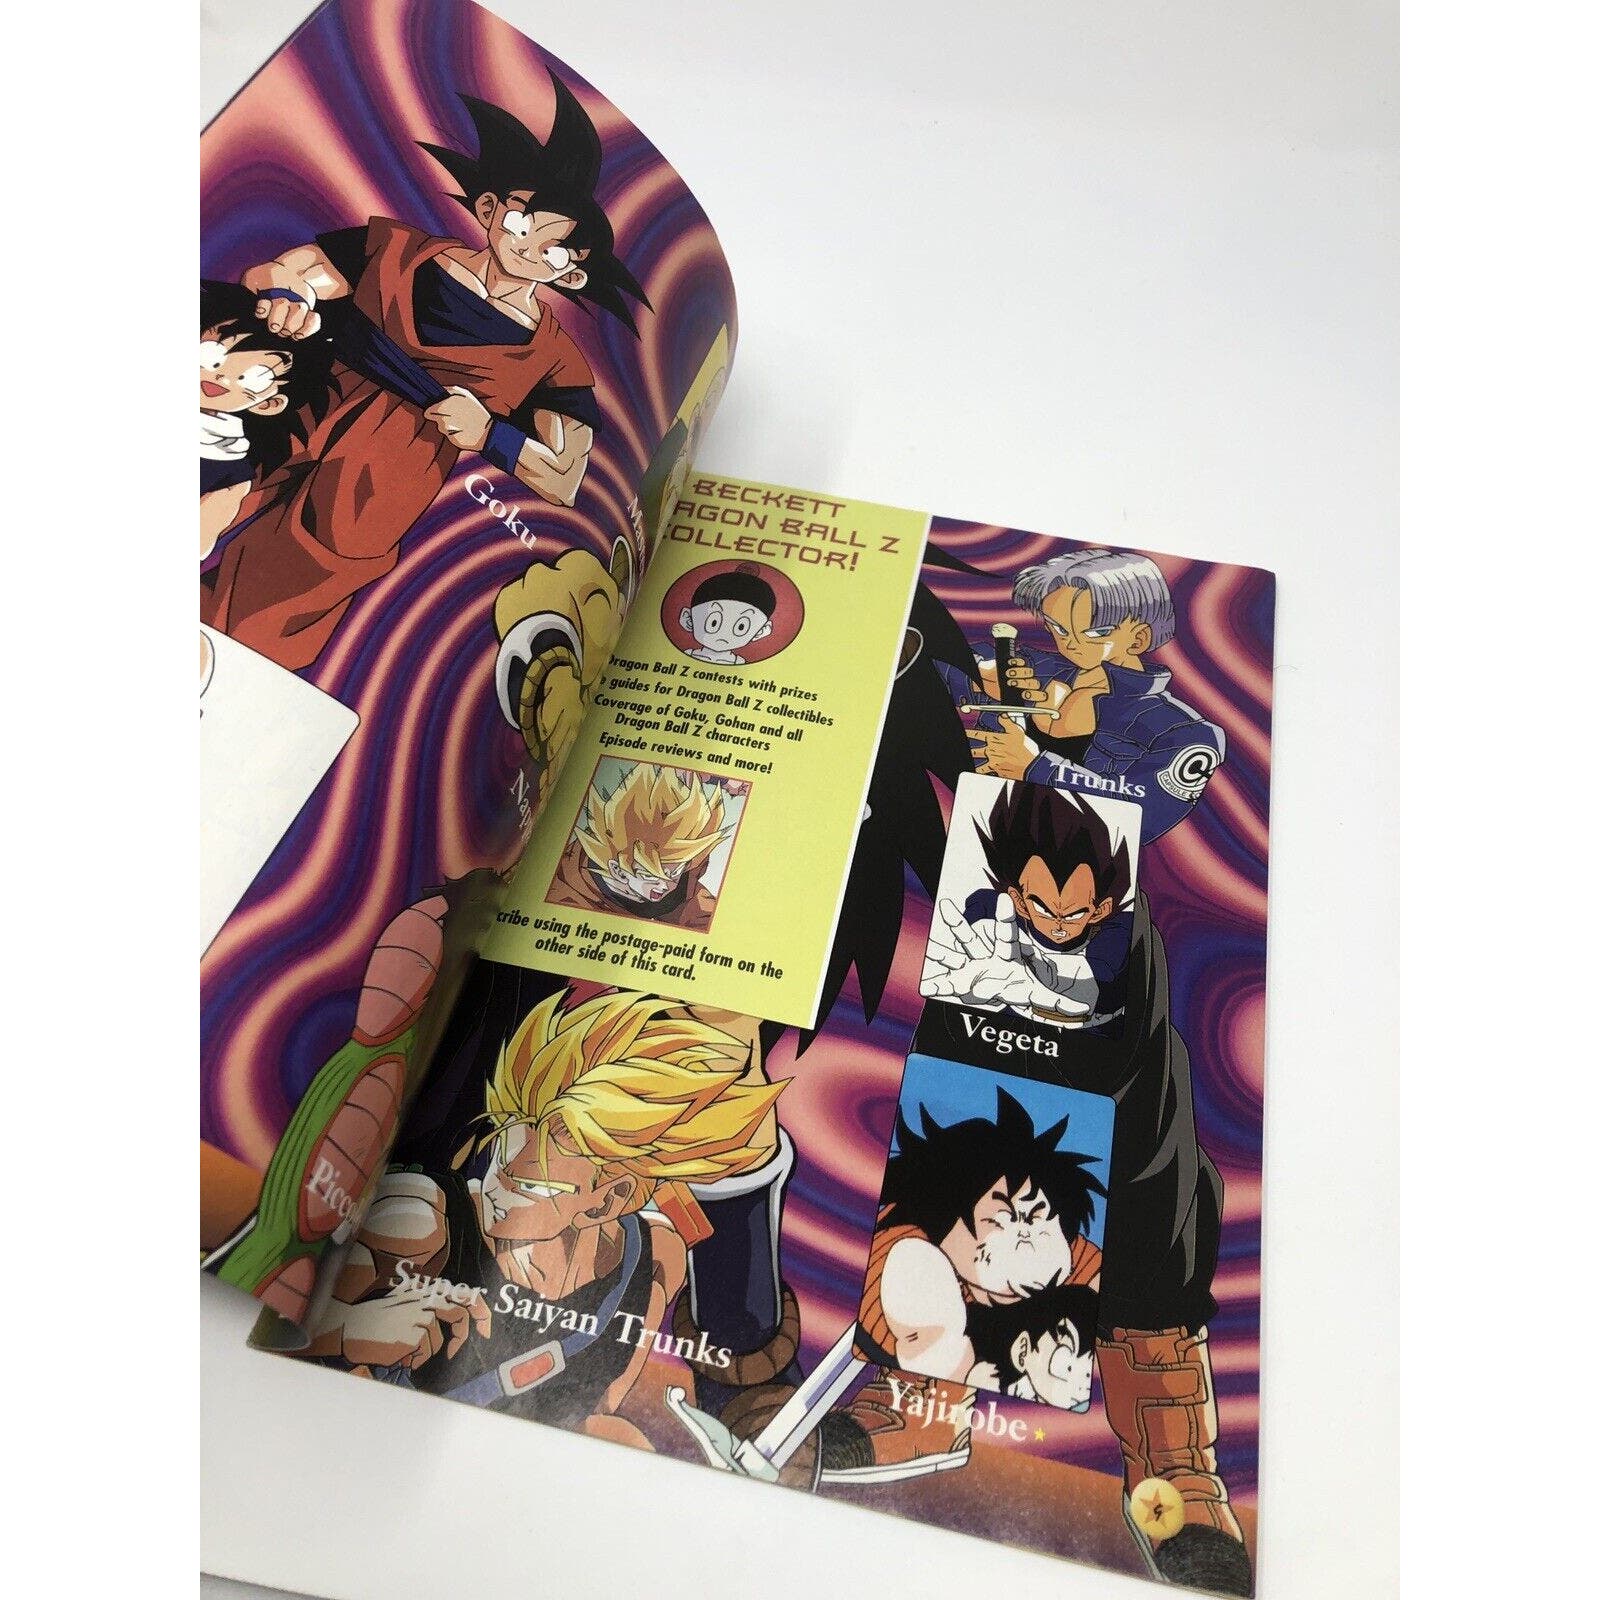 Beckett Dragonball Z Collector #1 Premiere Edition Magazine Vol 1 No 1 Issue 1 - Uncle Buddy's Beard & Used Books